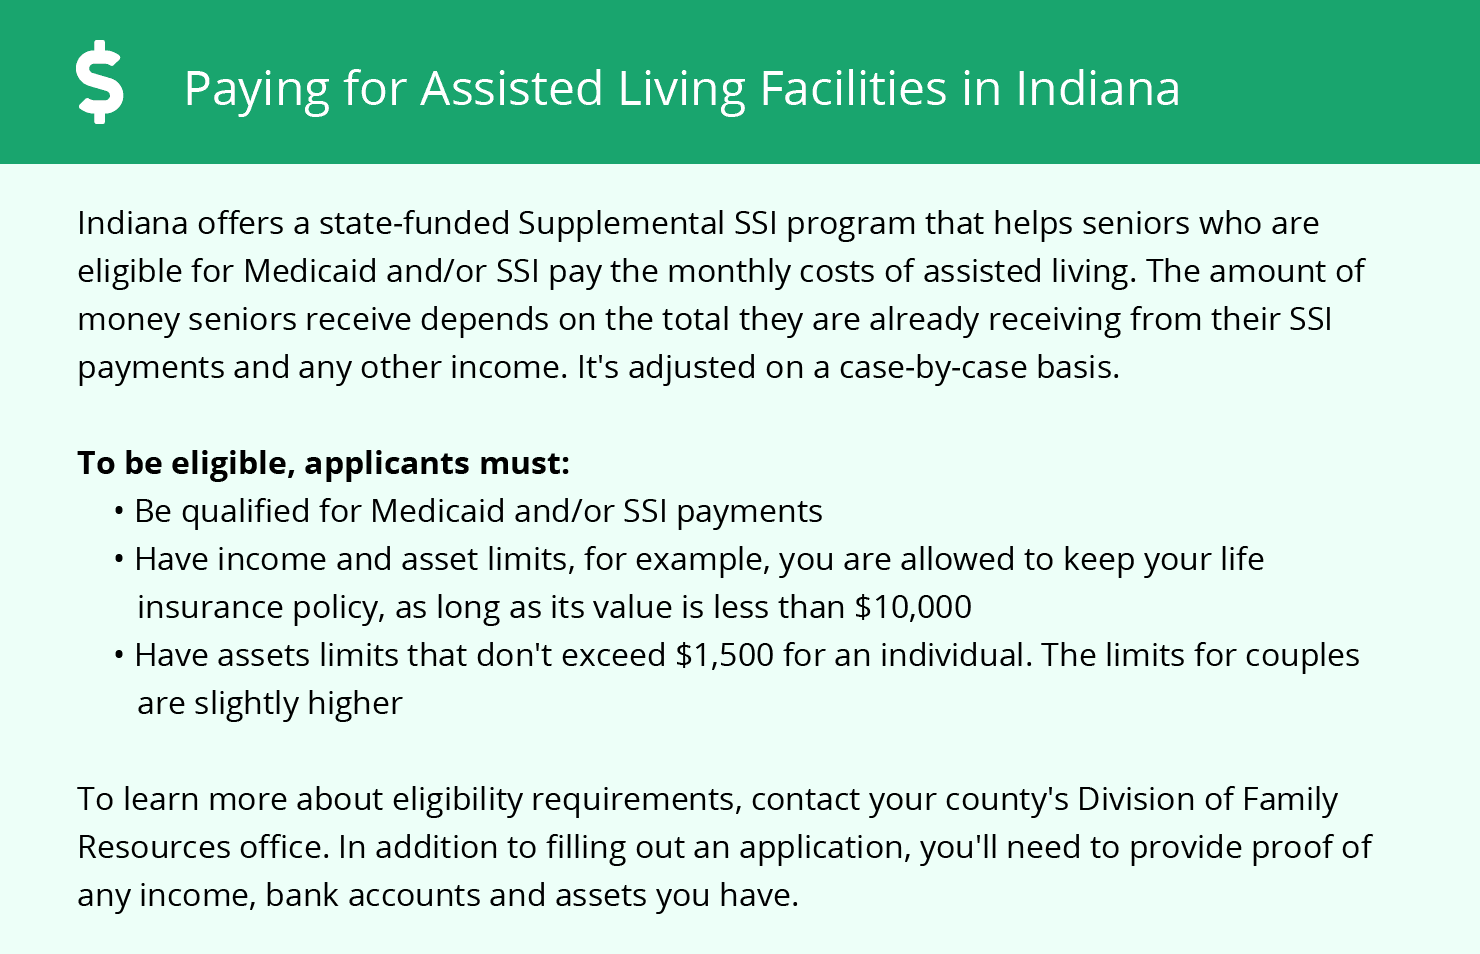 Paying for Assisted Living Facilities in Indiana